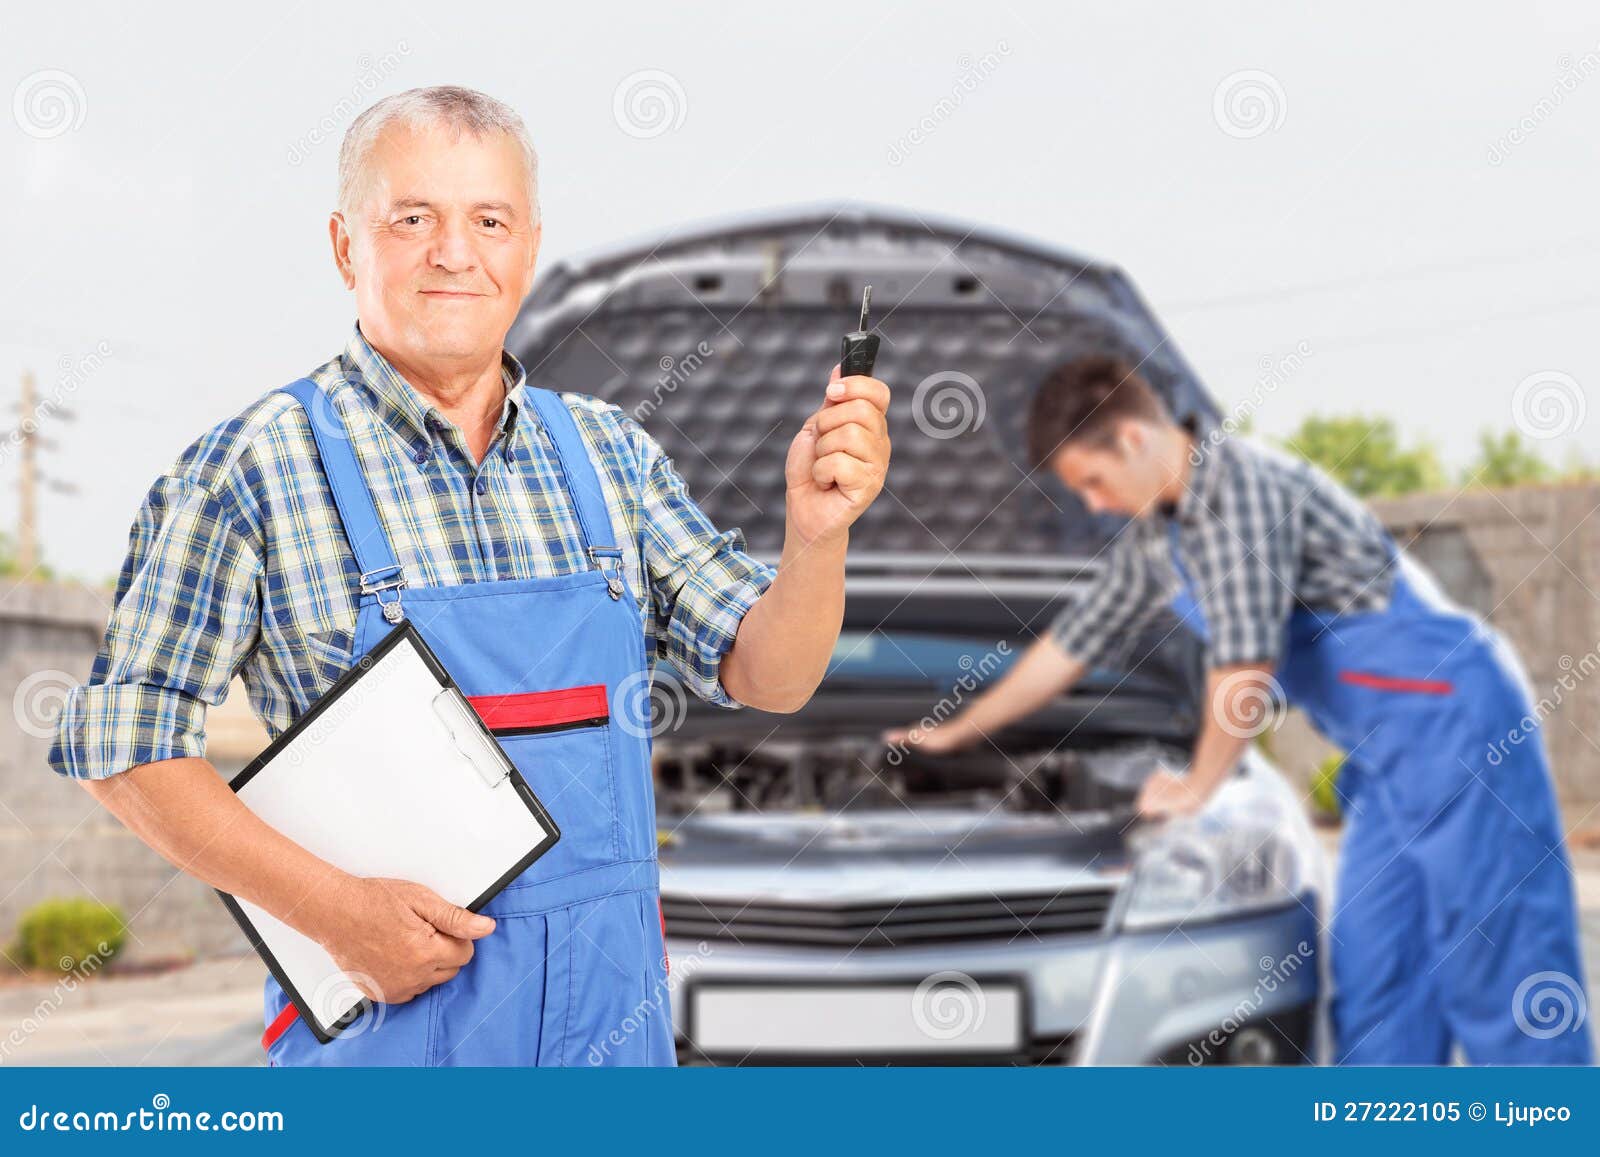  car key and another mechanic performing a car check in the background